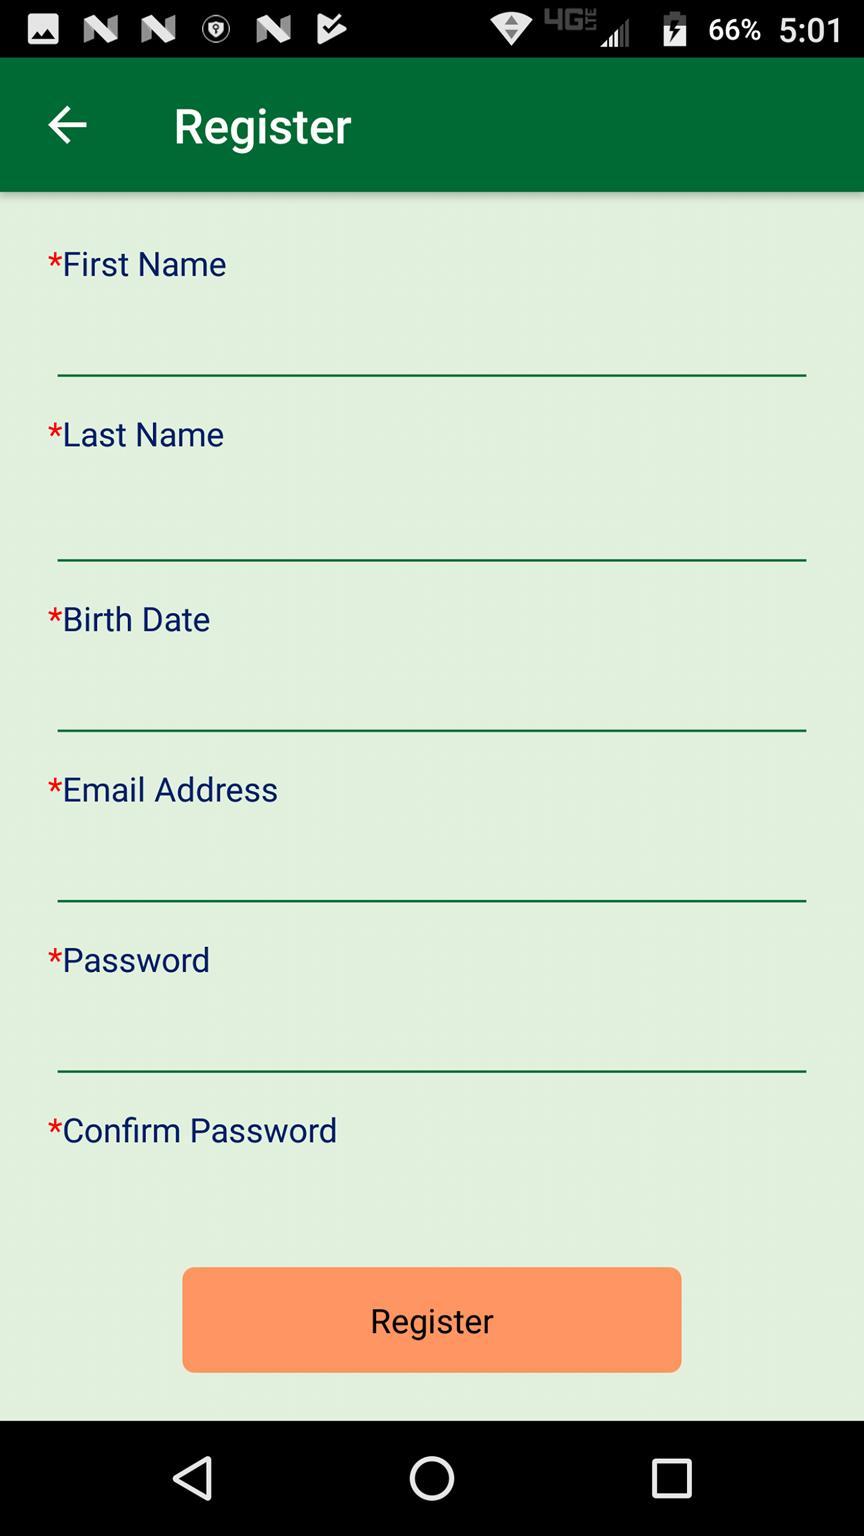 Password - passwords must be: Between 8 to 20 characters Contain at